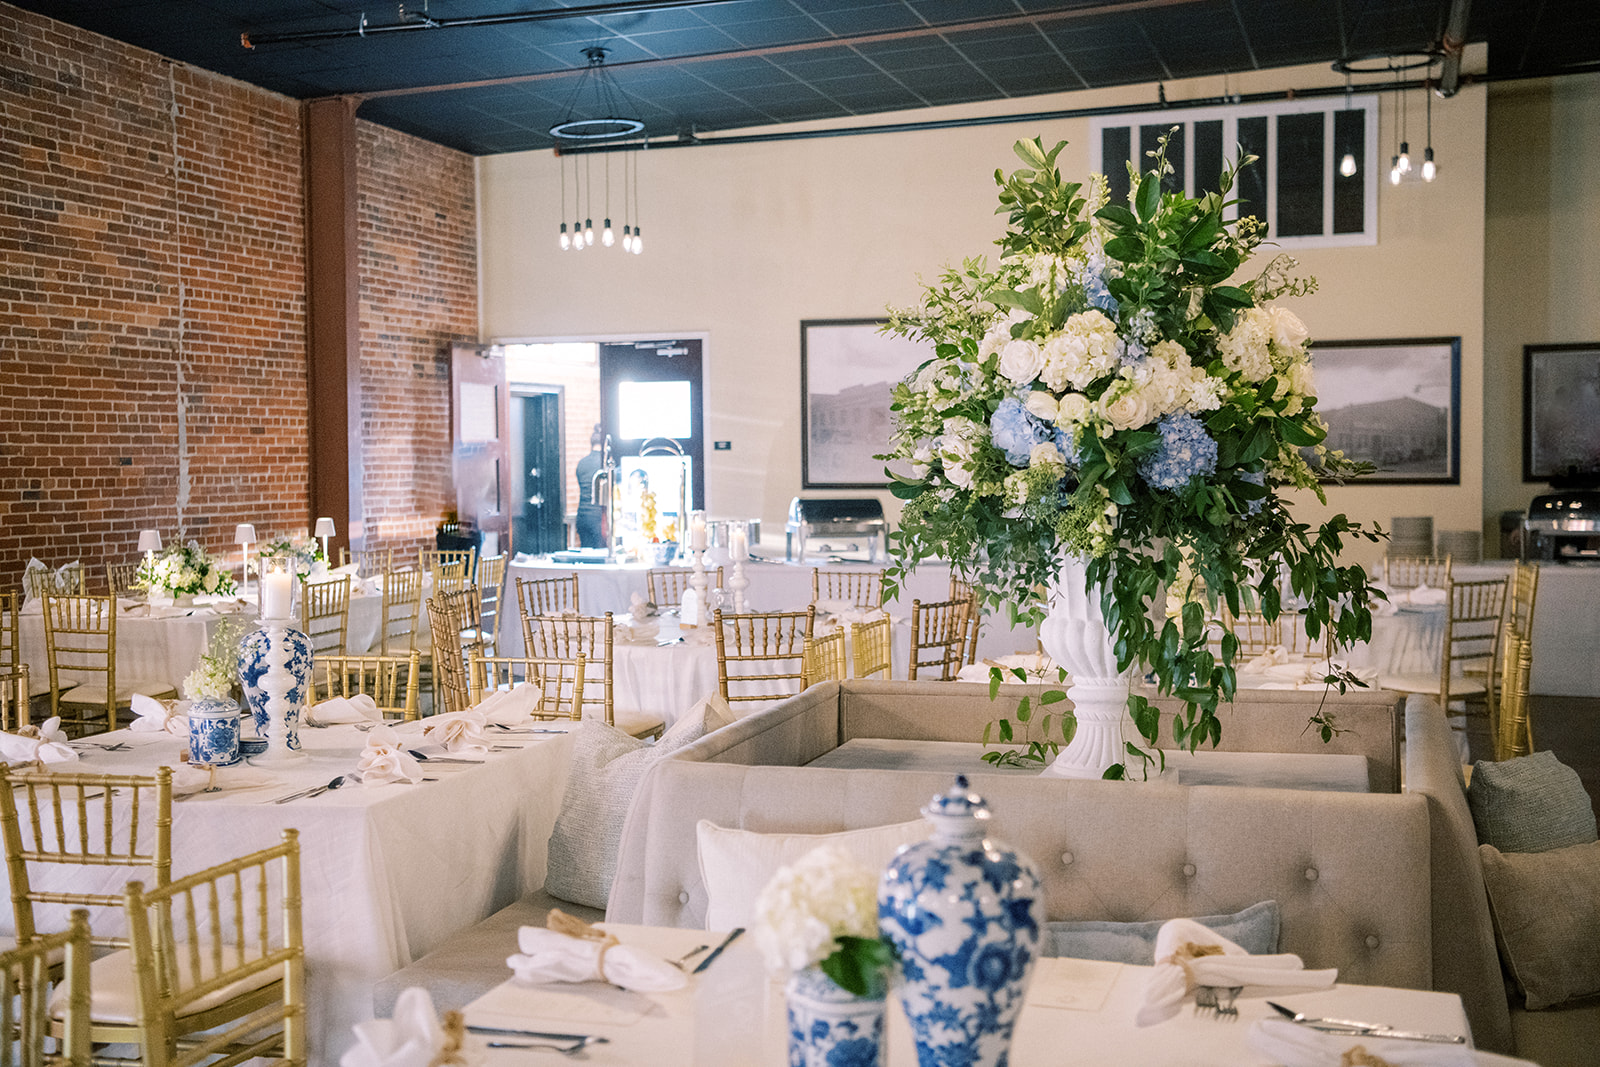 wedding reception in thomasville ga at the biscuit company, blue and white pottery decor